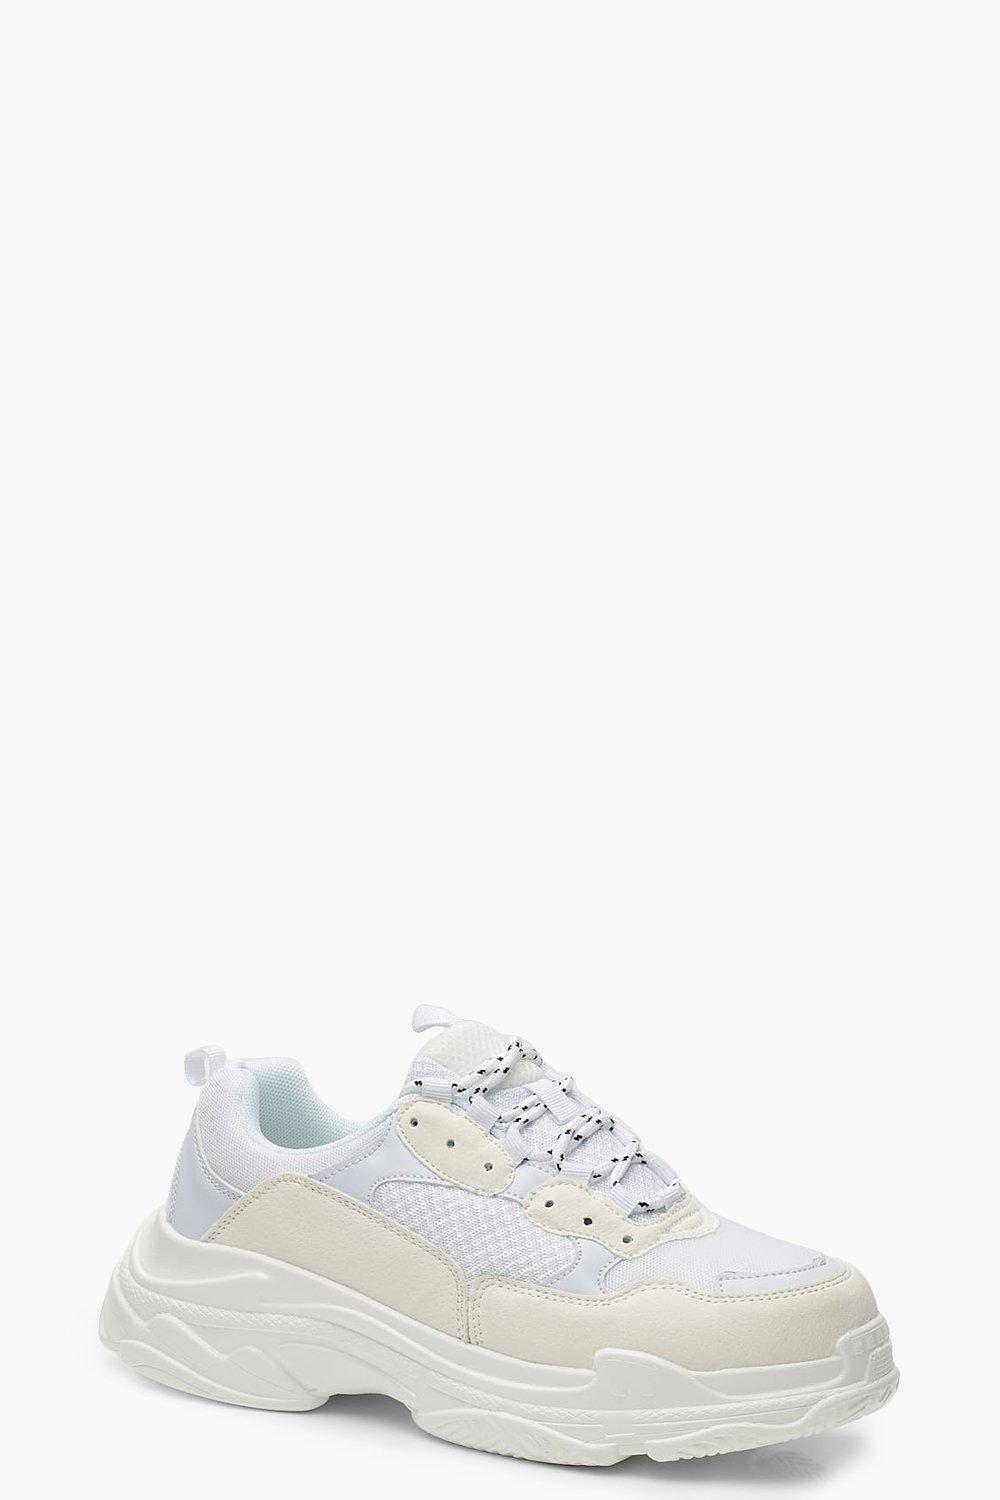 white lace up tennis shoes